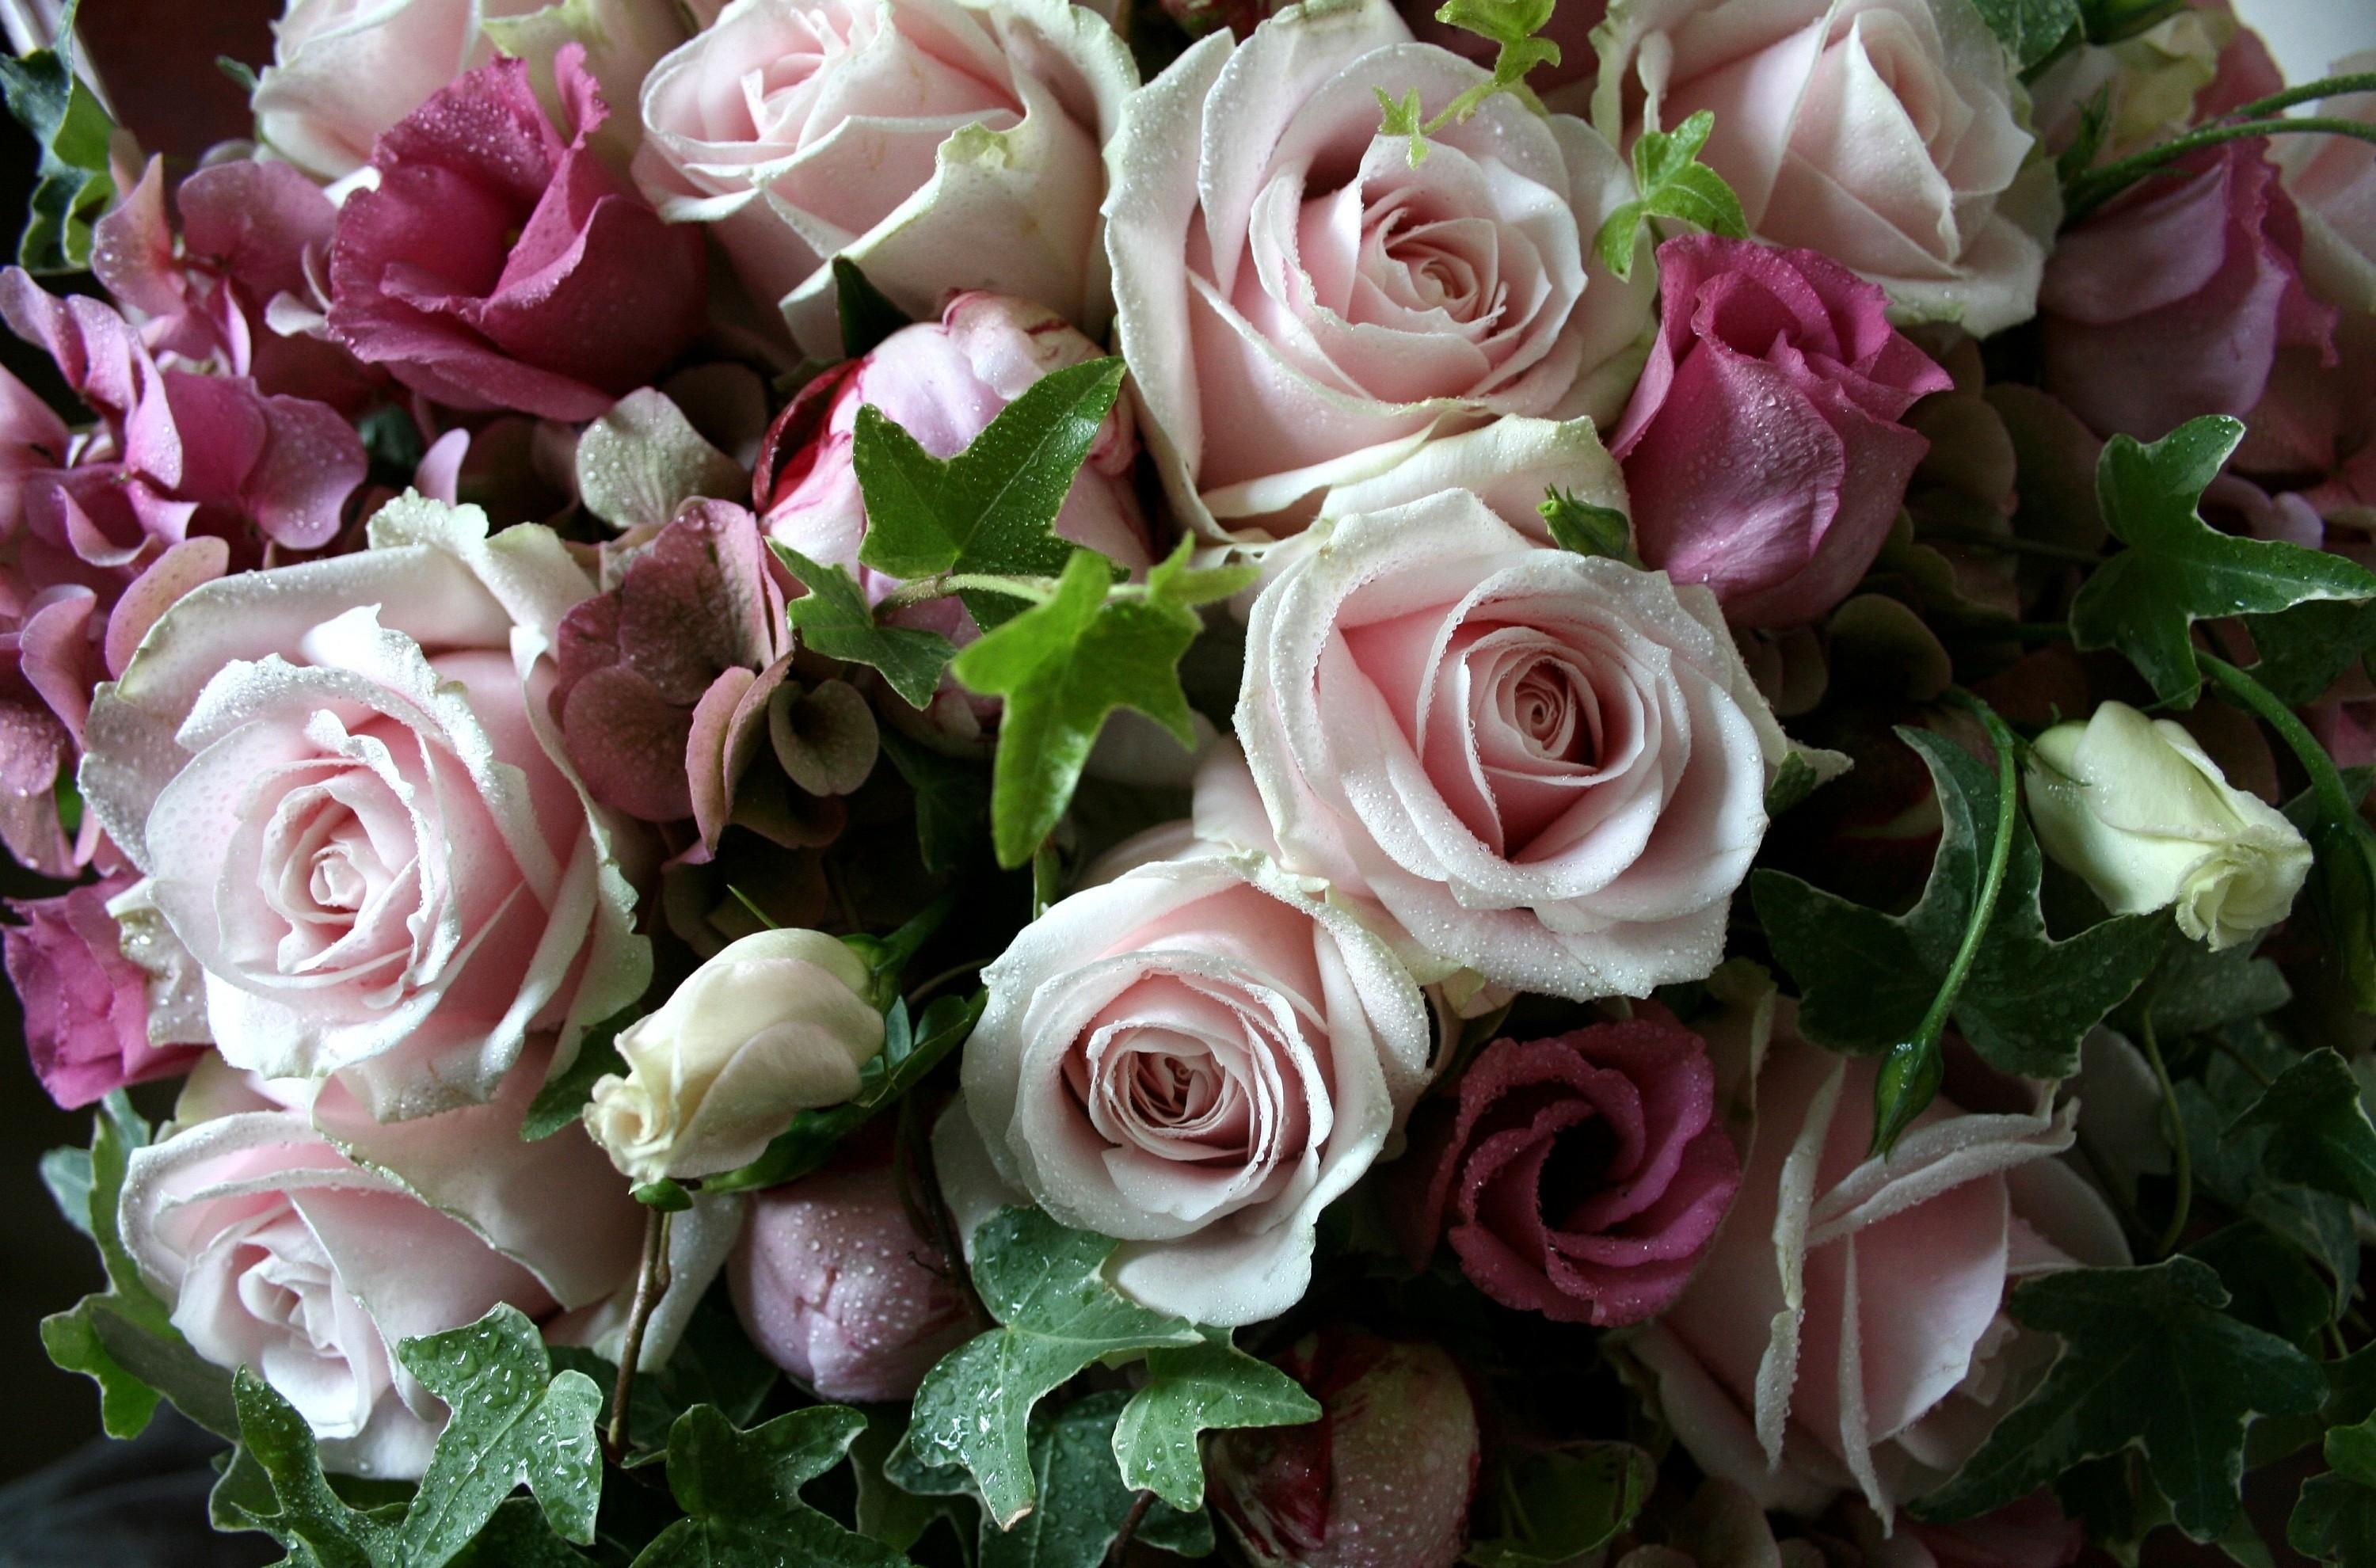 drops, leaves, flowers, roses, bouquet, freshness, lisianthus russell, lisiantus russell